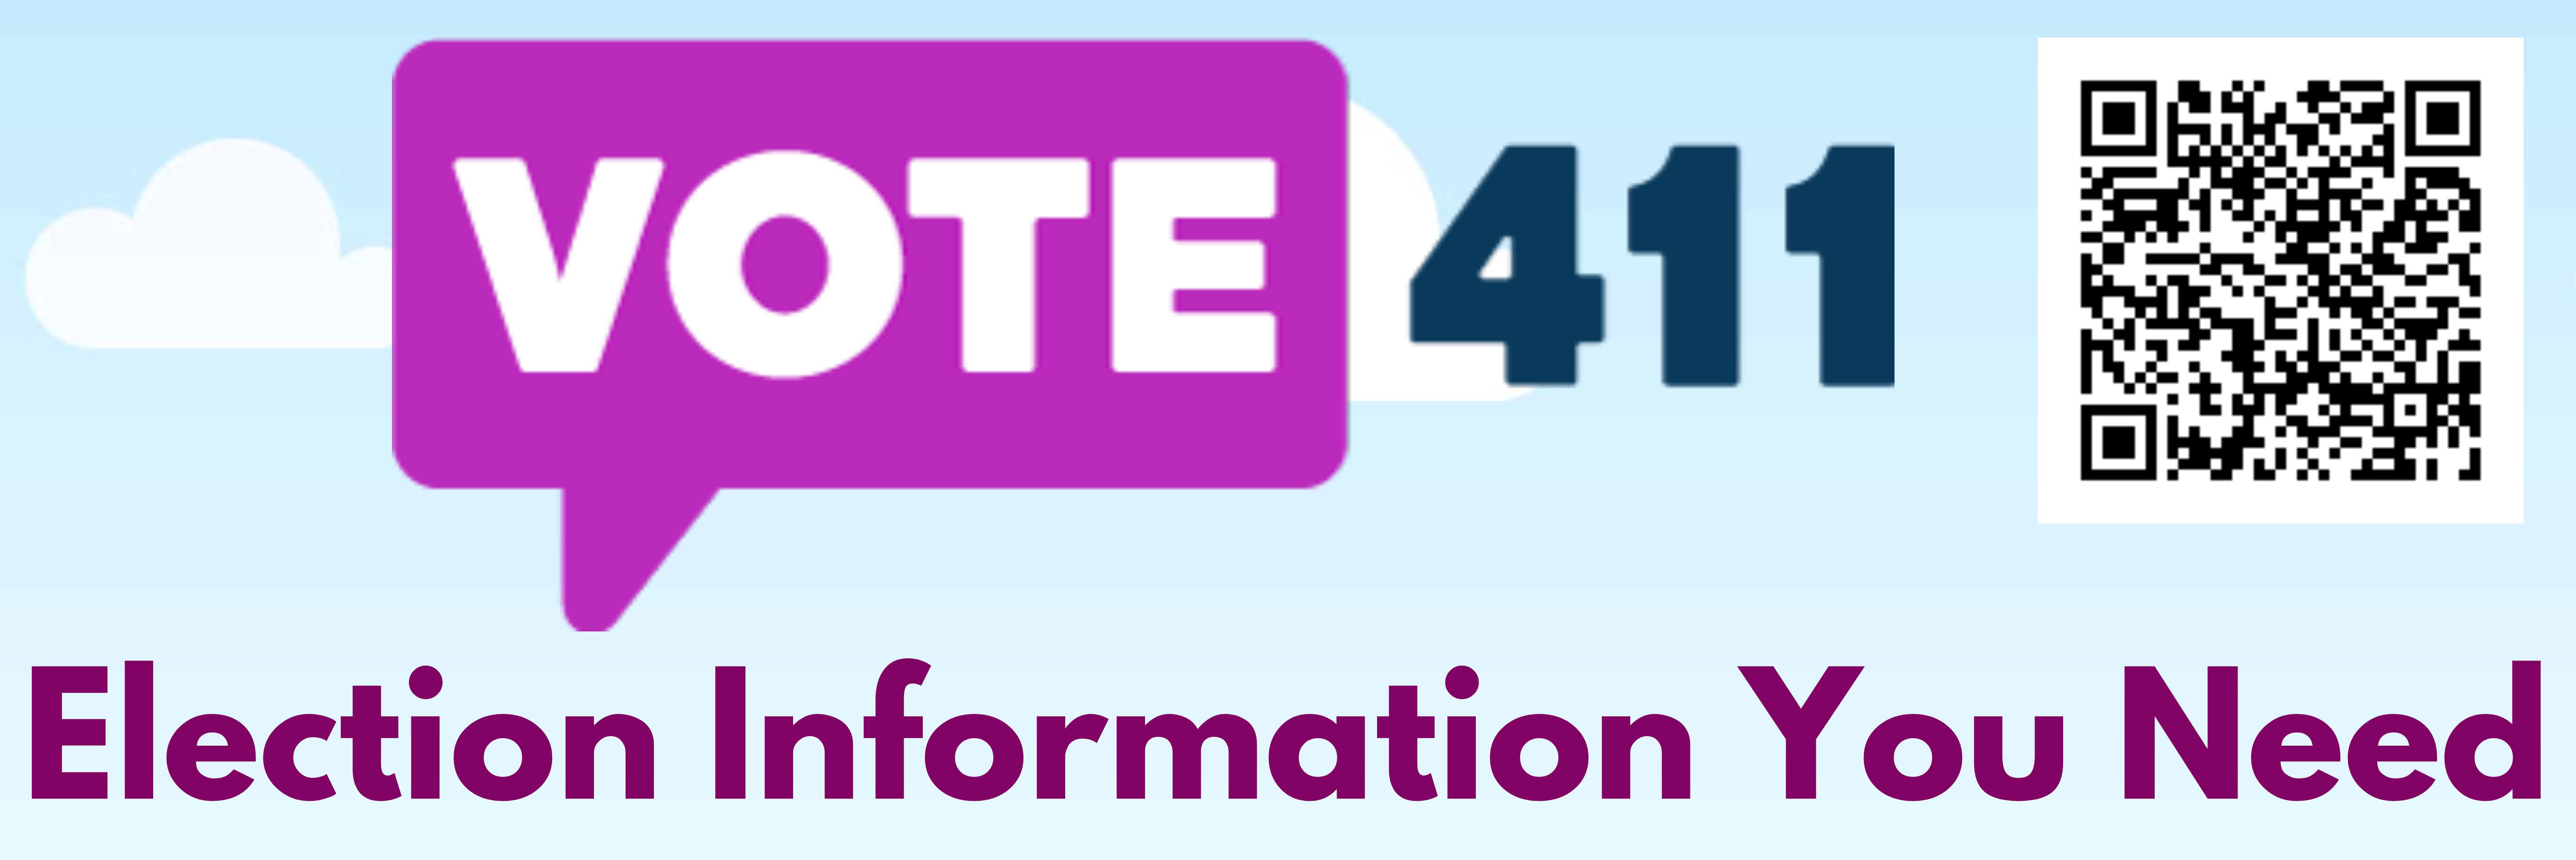 VOTE 411 - Election Information You Need